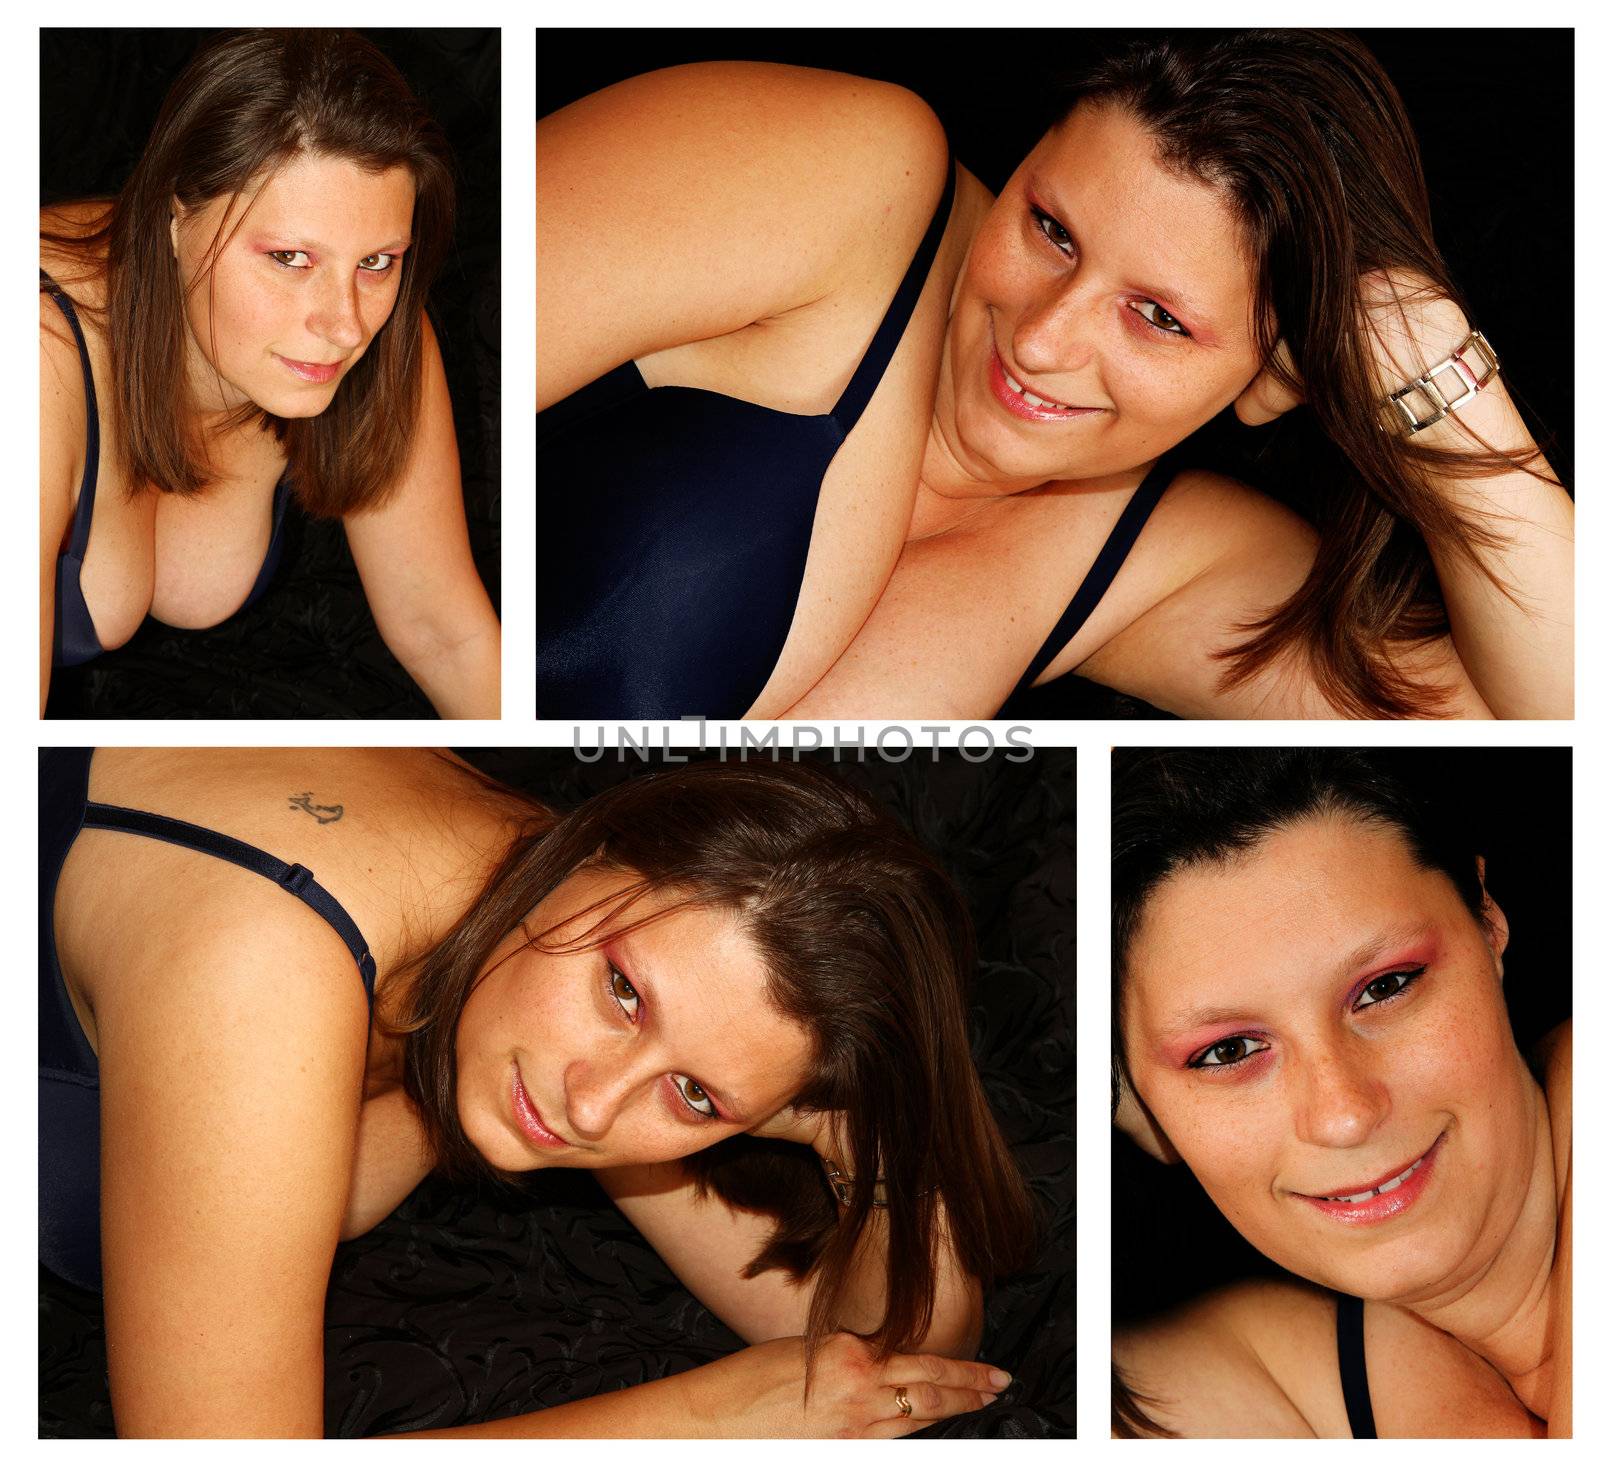 collage of sexy woman